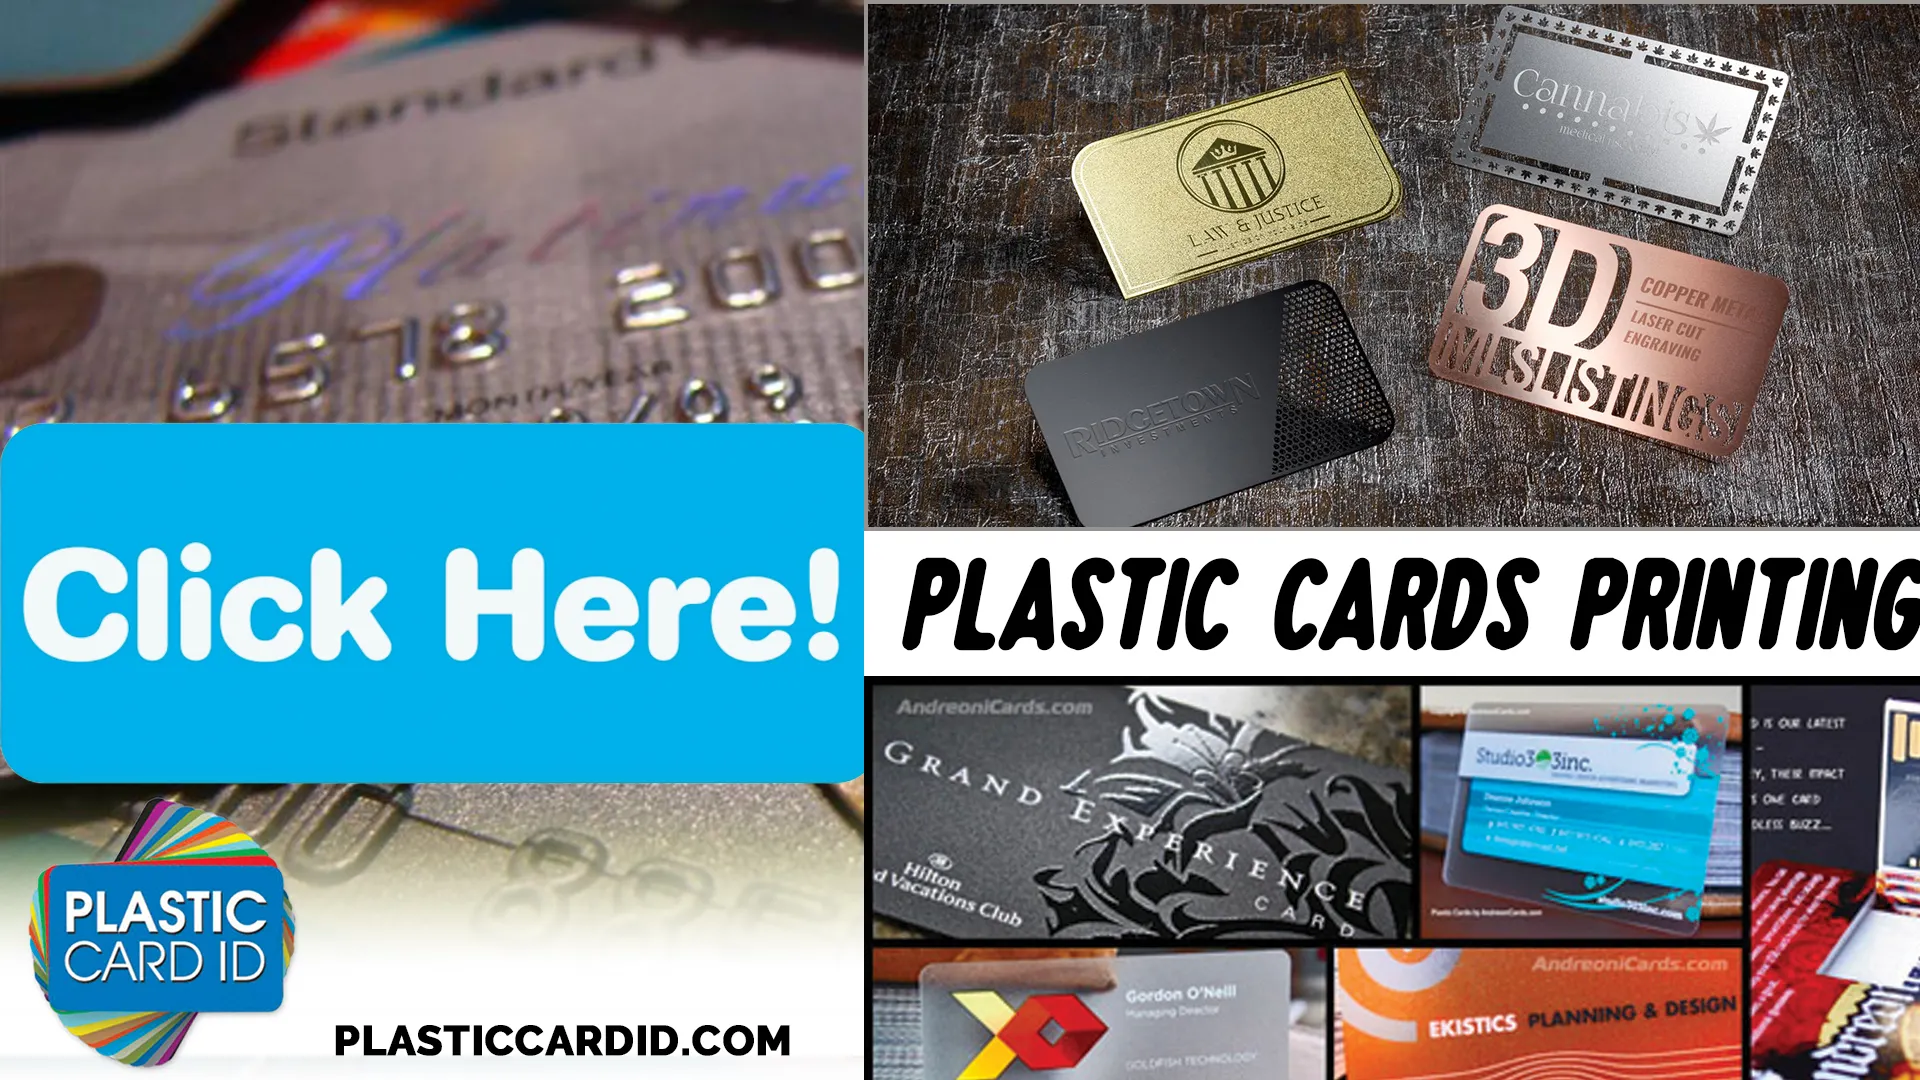 Stay Protected with Cutting-Edge Card Printer Technology from Plastic Card ID
